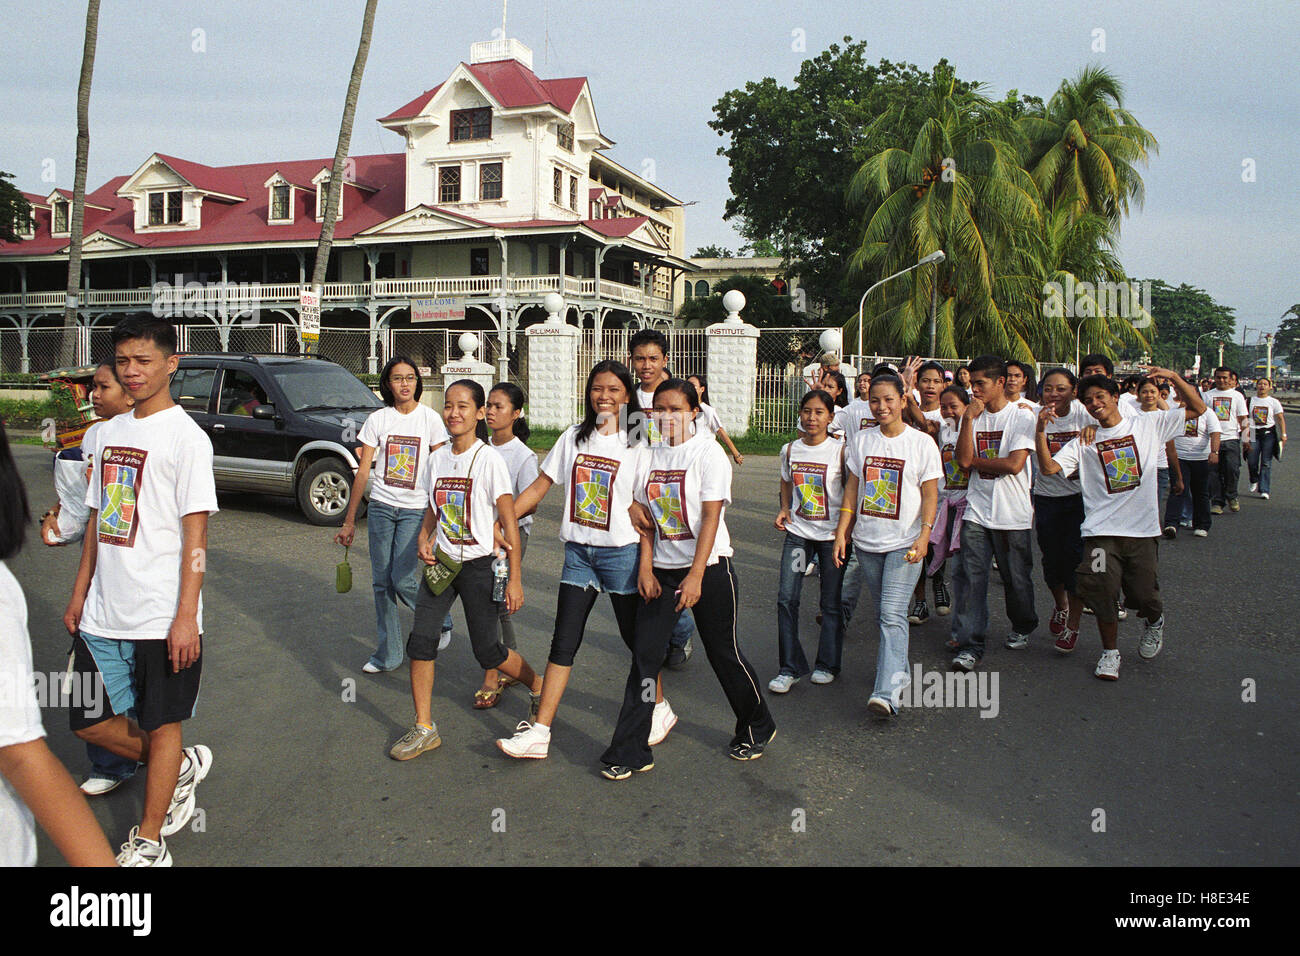 Students in Dumaguete Negros Island Philippines Stock Photo